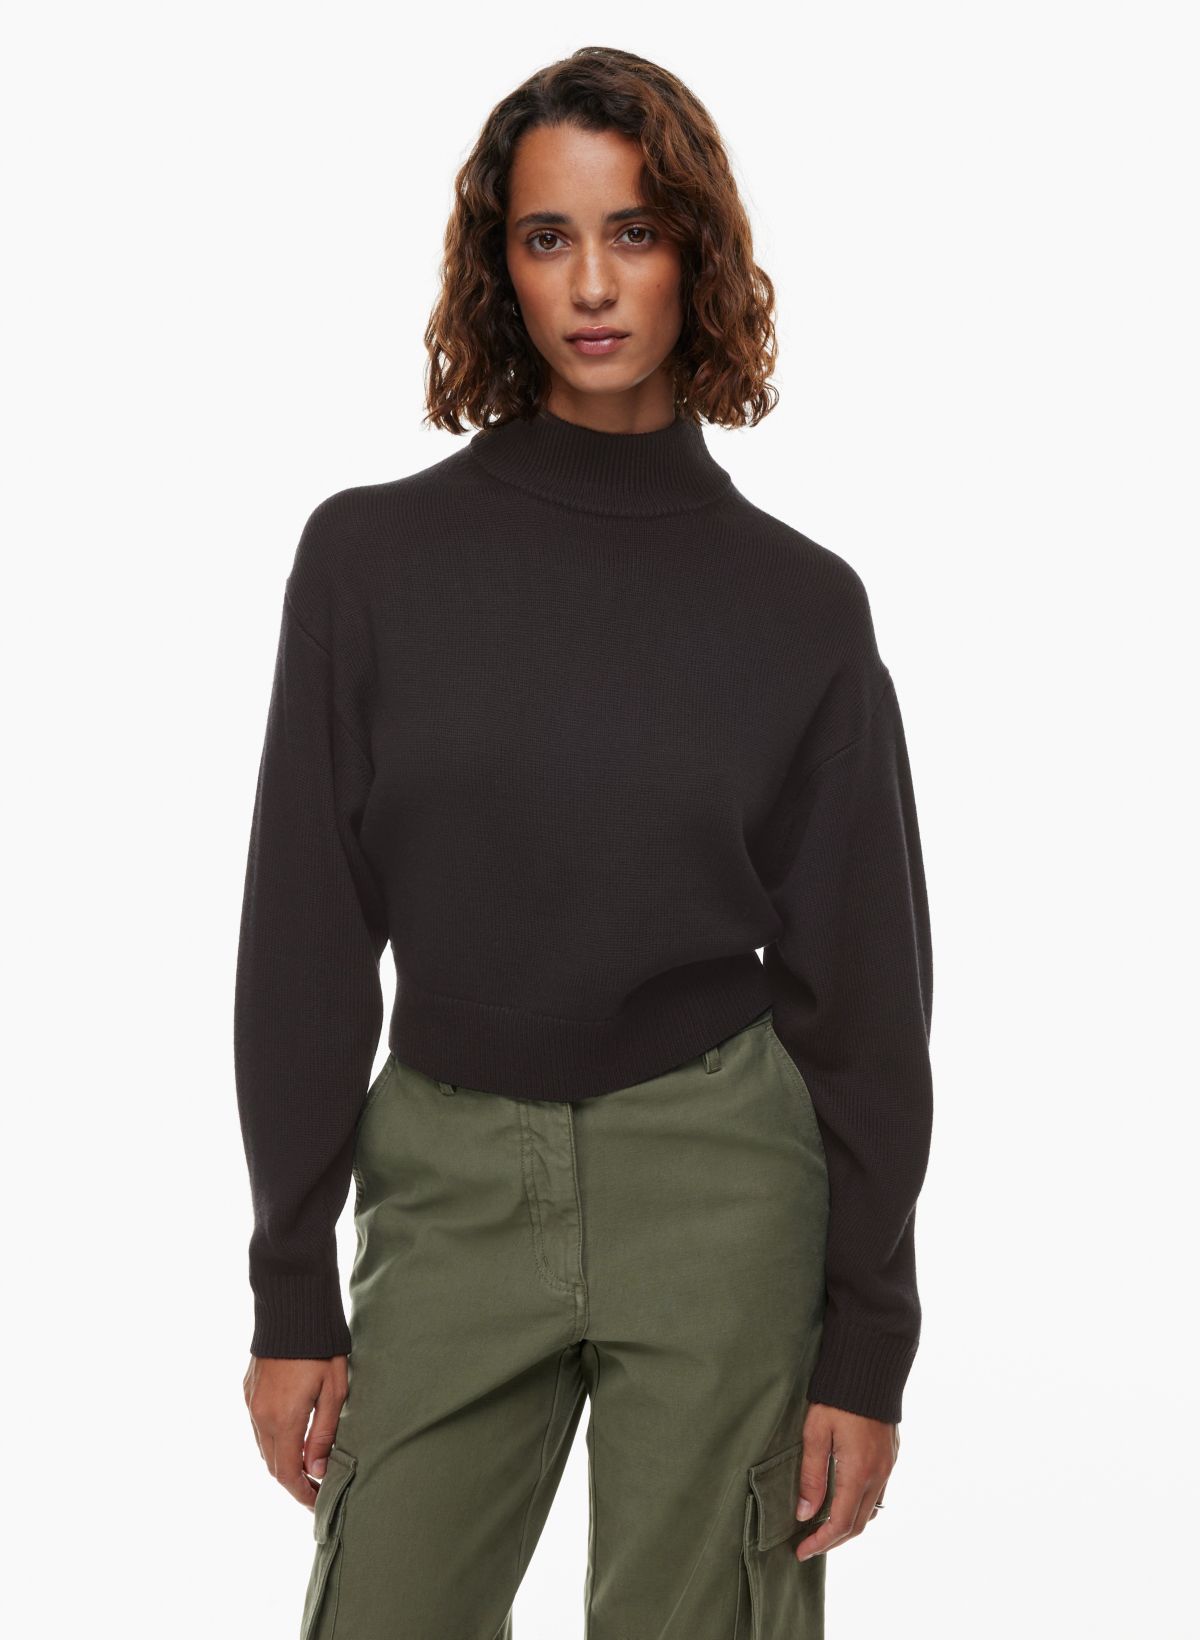 Shop Sweater Tuck with great discounts and prices online - Nov